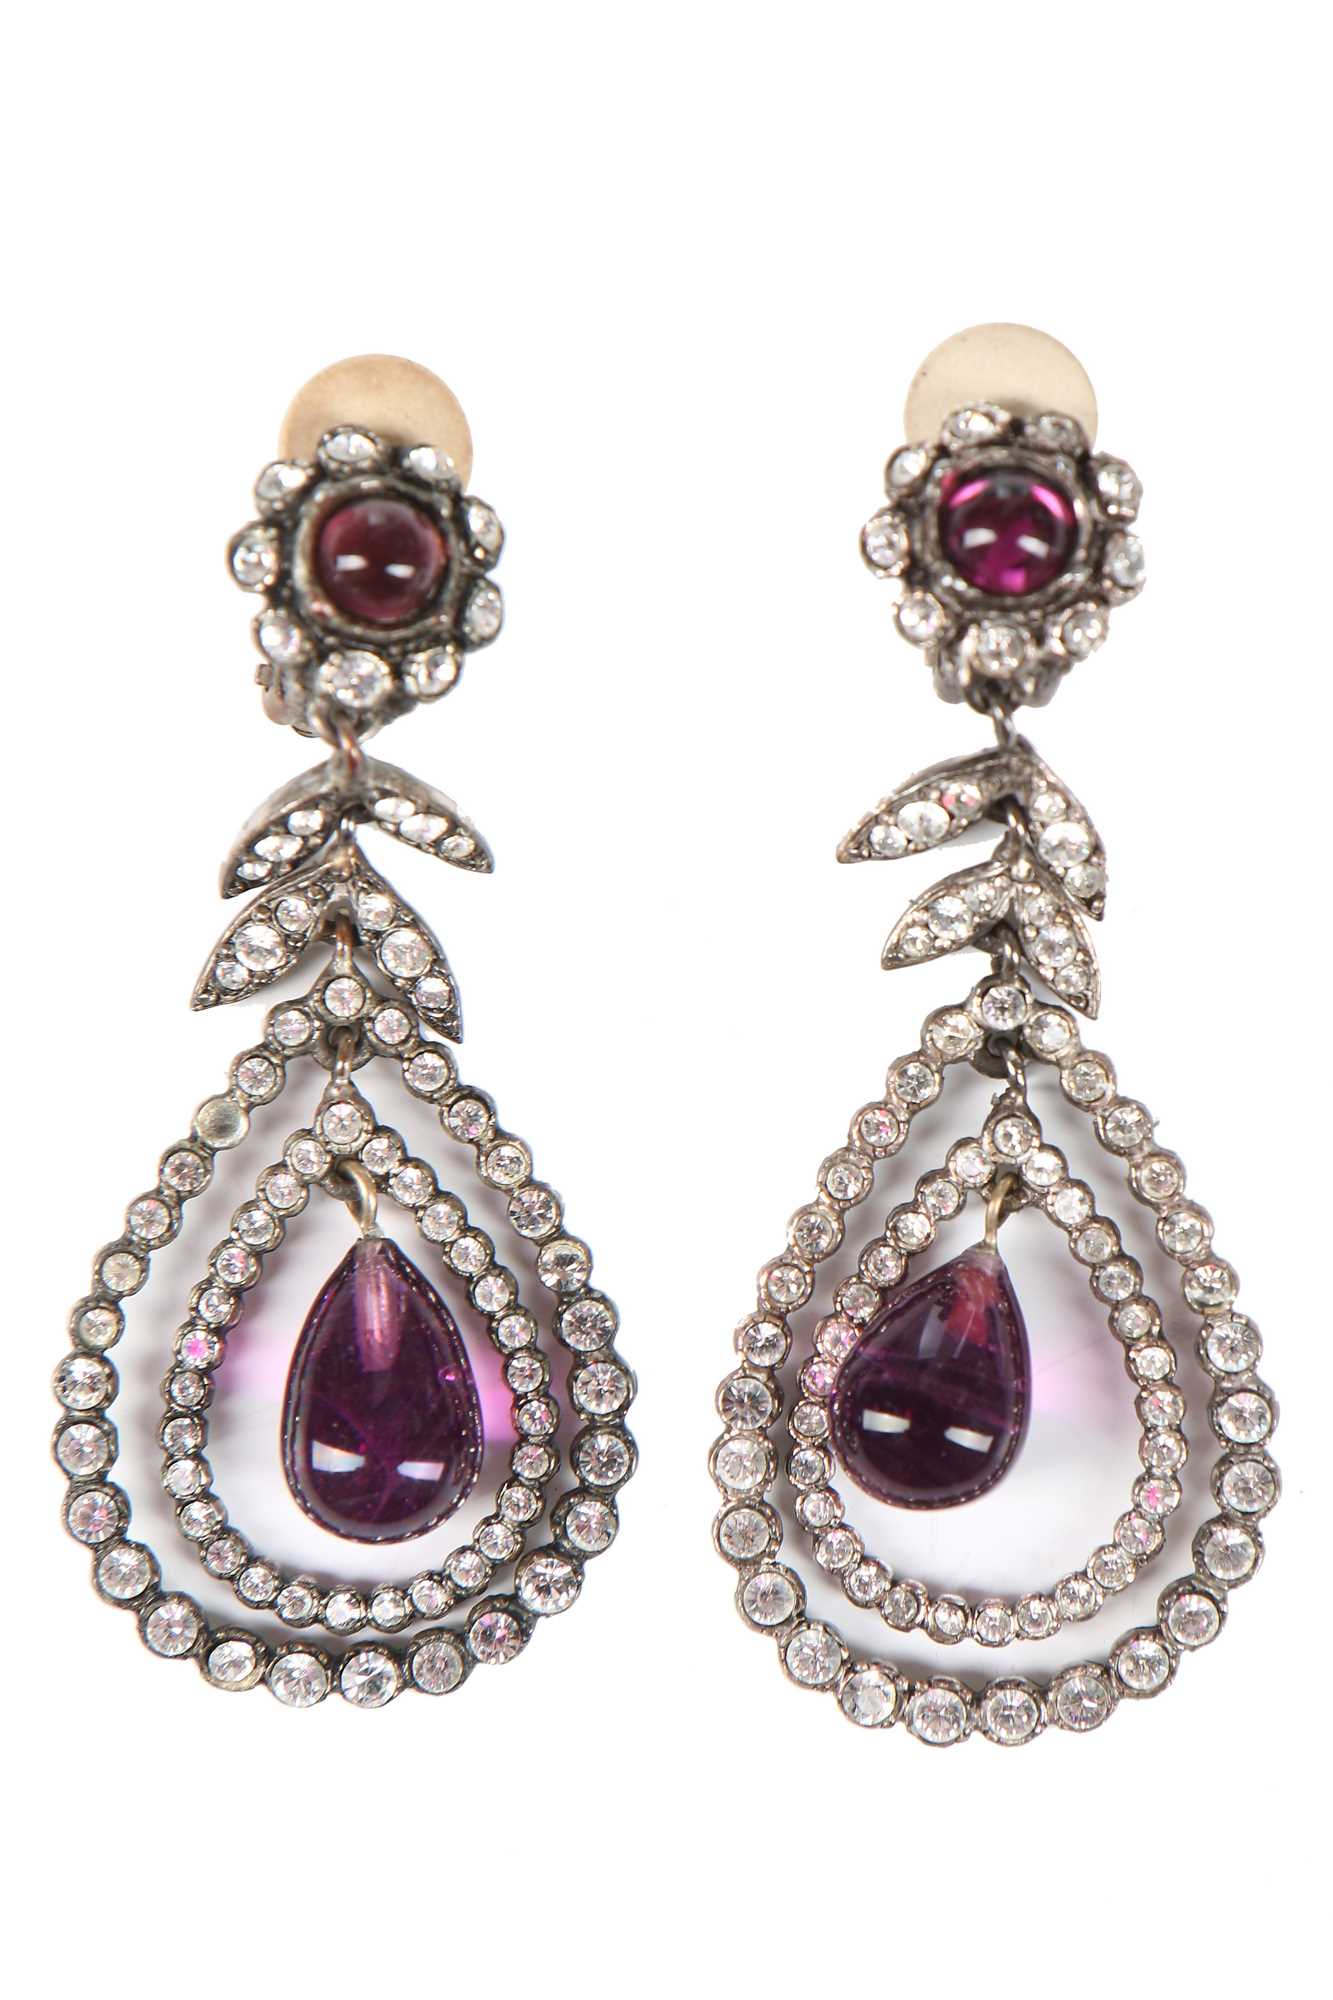 Lot 39 - Two pairs of Christian Dior earrings, late 1990s